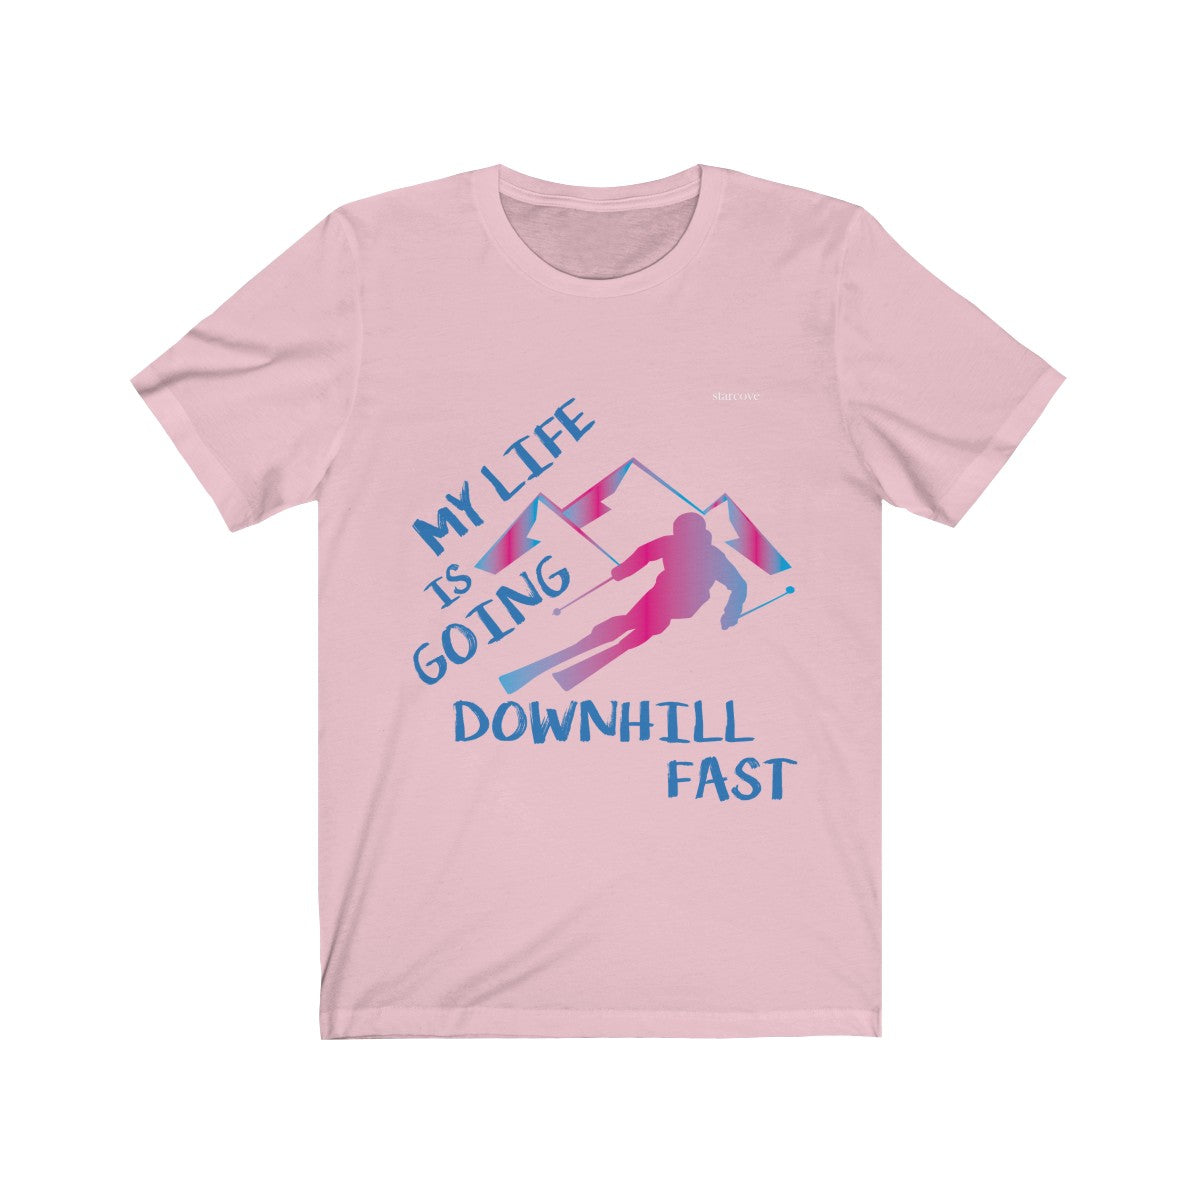 My Life is Going Downhill Fast Shirt, Funny Skiers Skiing I Love Alpine Ski Winter Sports Snow Vacation Slopes Freestyle Gift Starcove Fashion